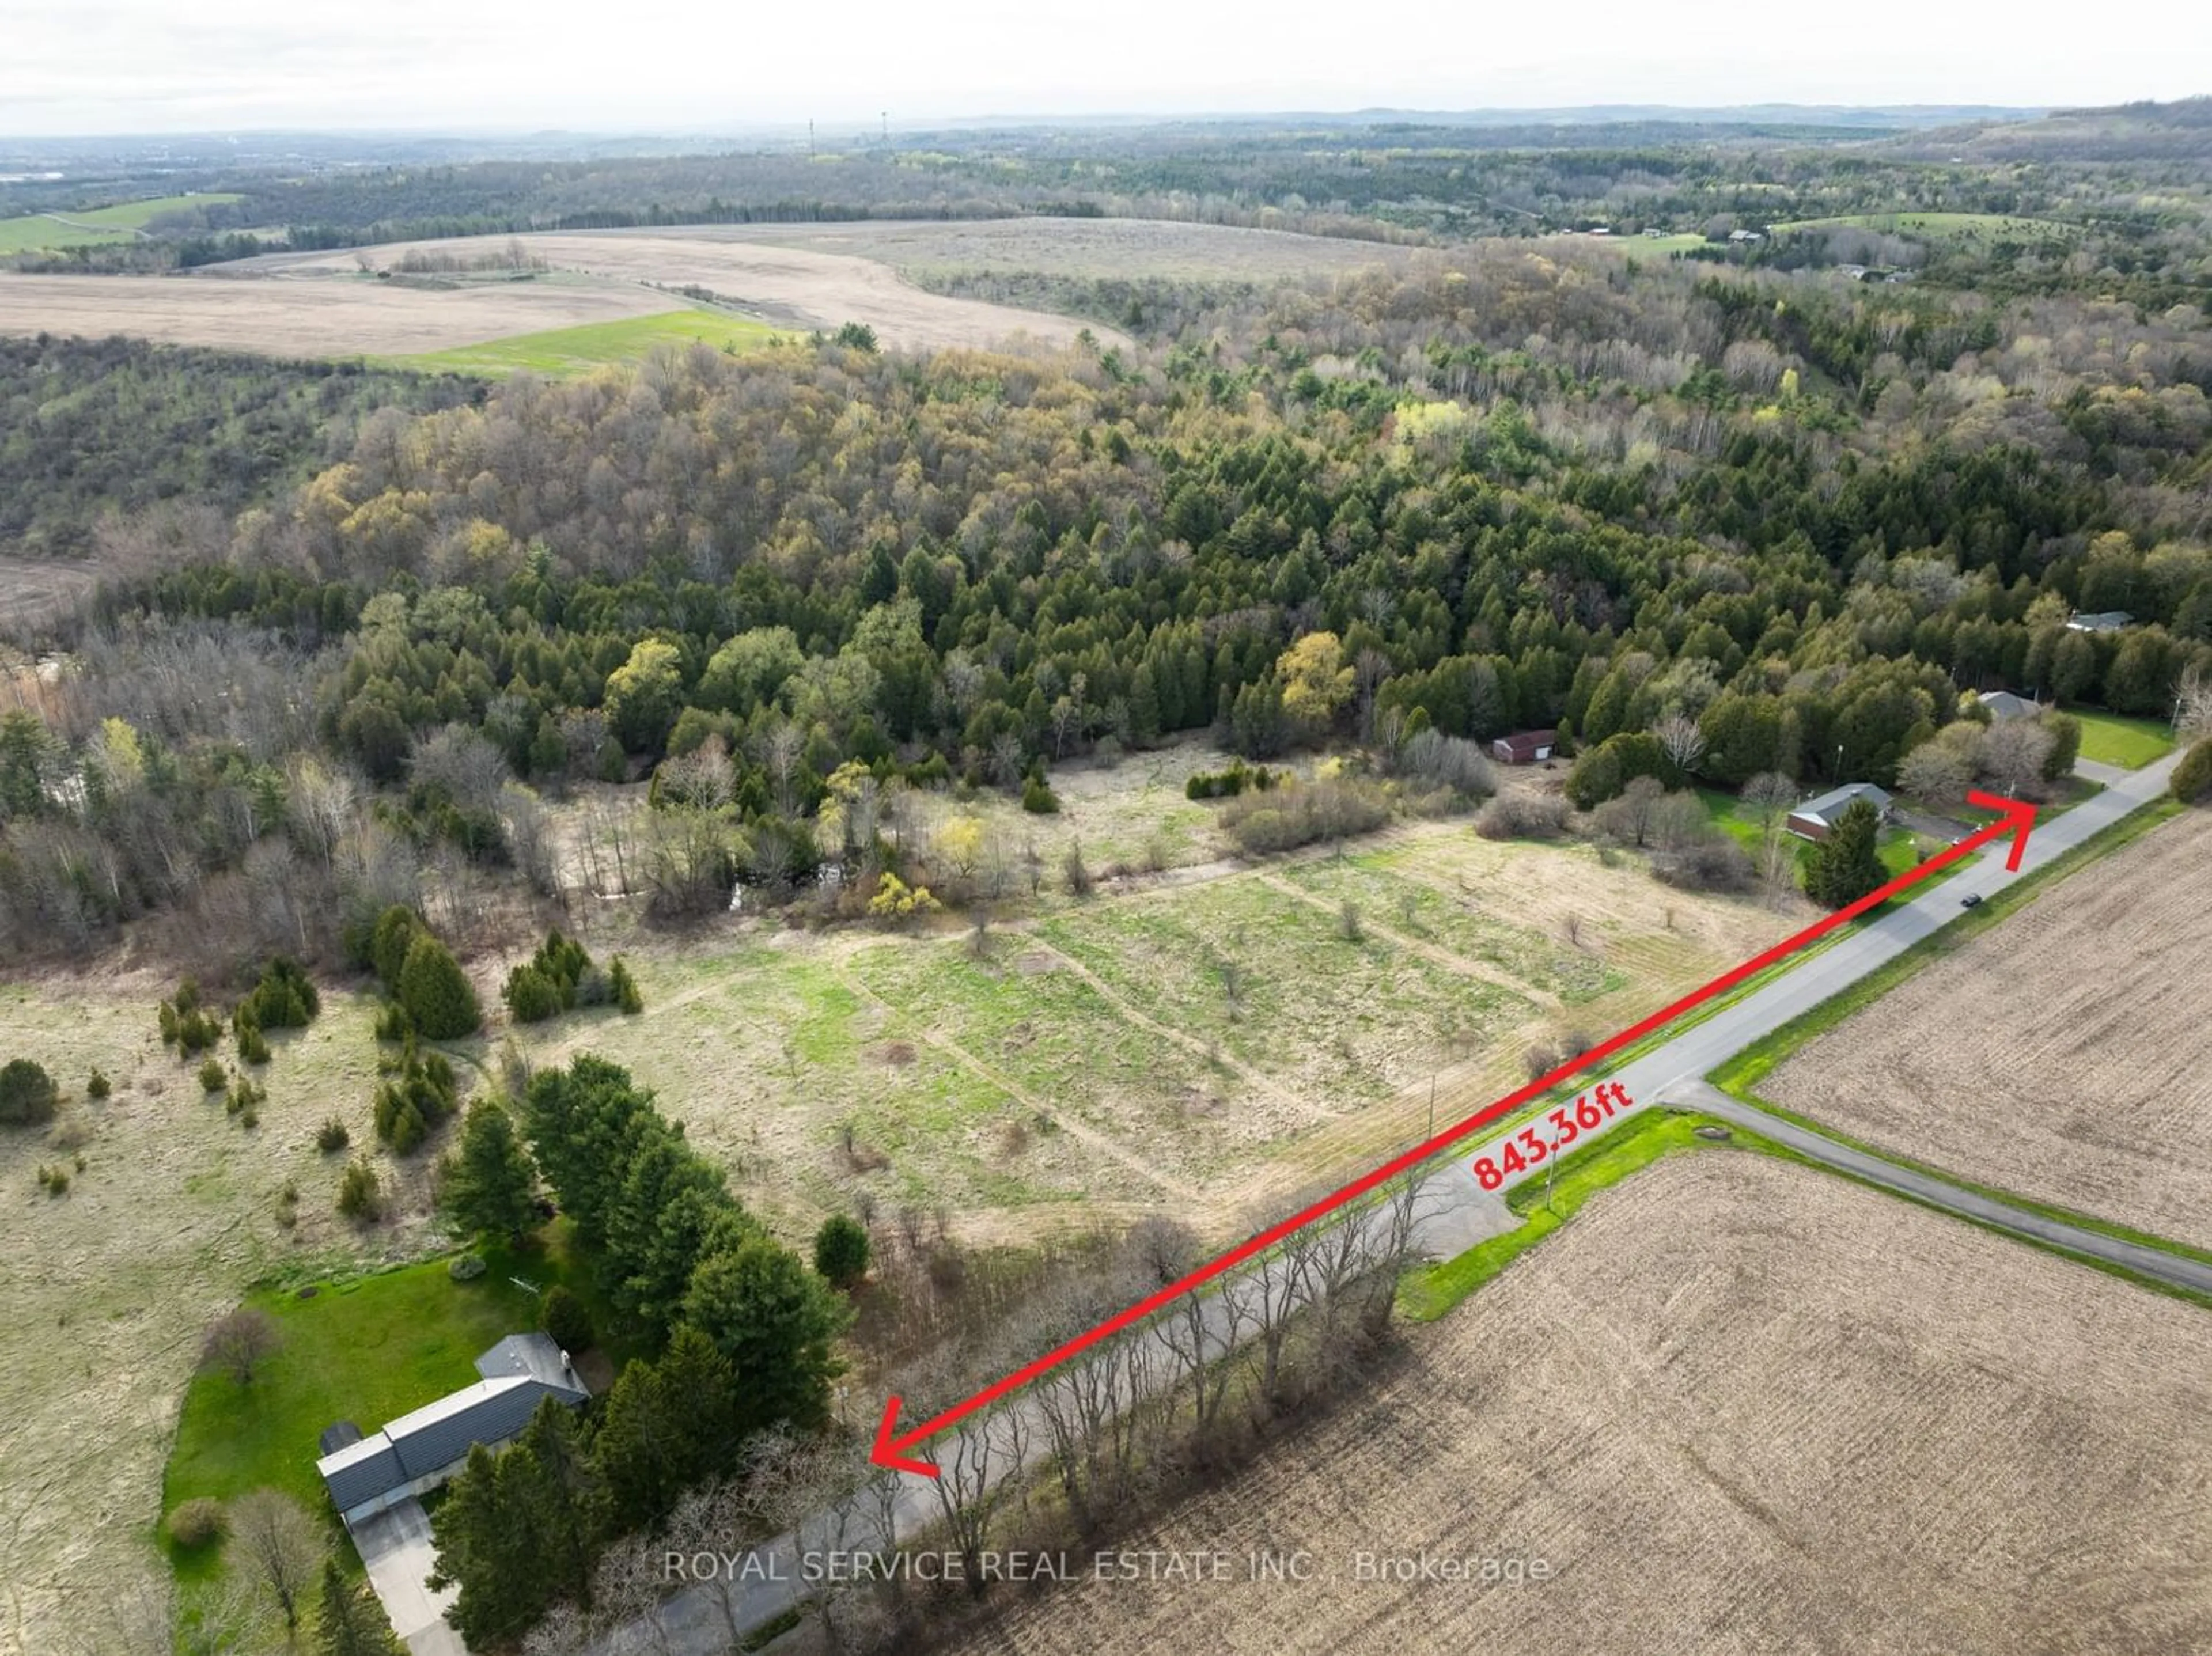 Fenced yard for 1832 Mcewen Rd, Cobourg Ontario K9A 4J8